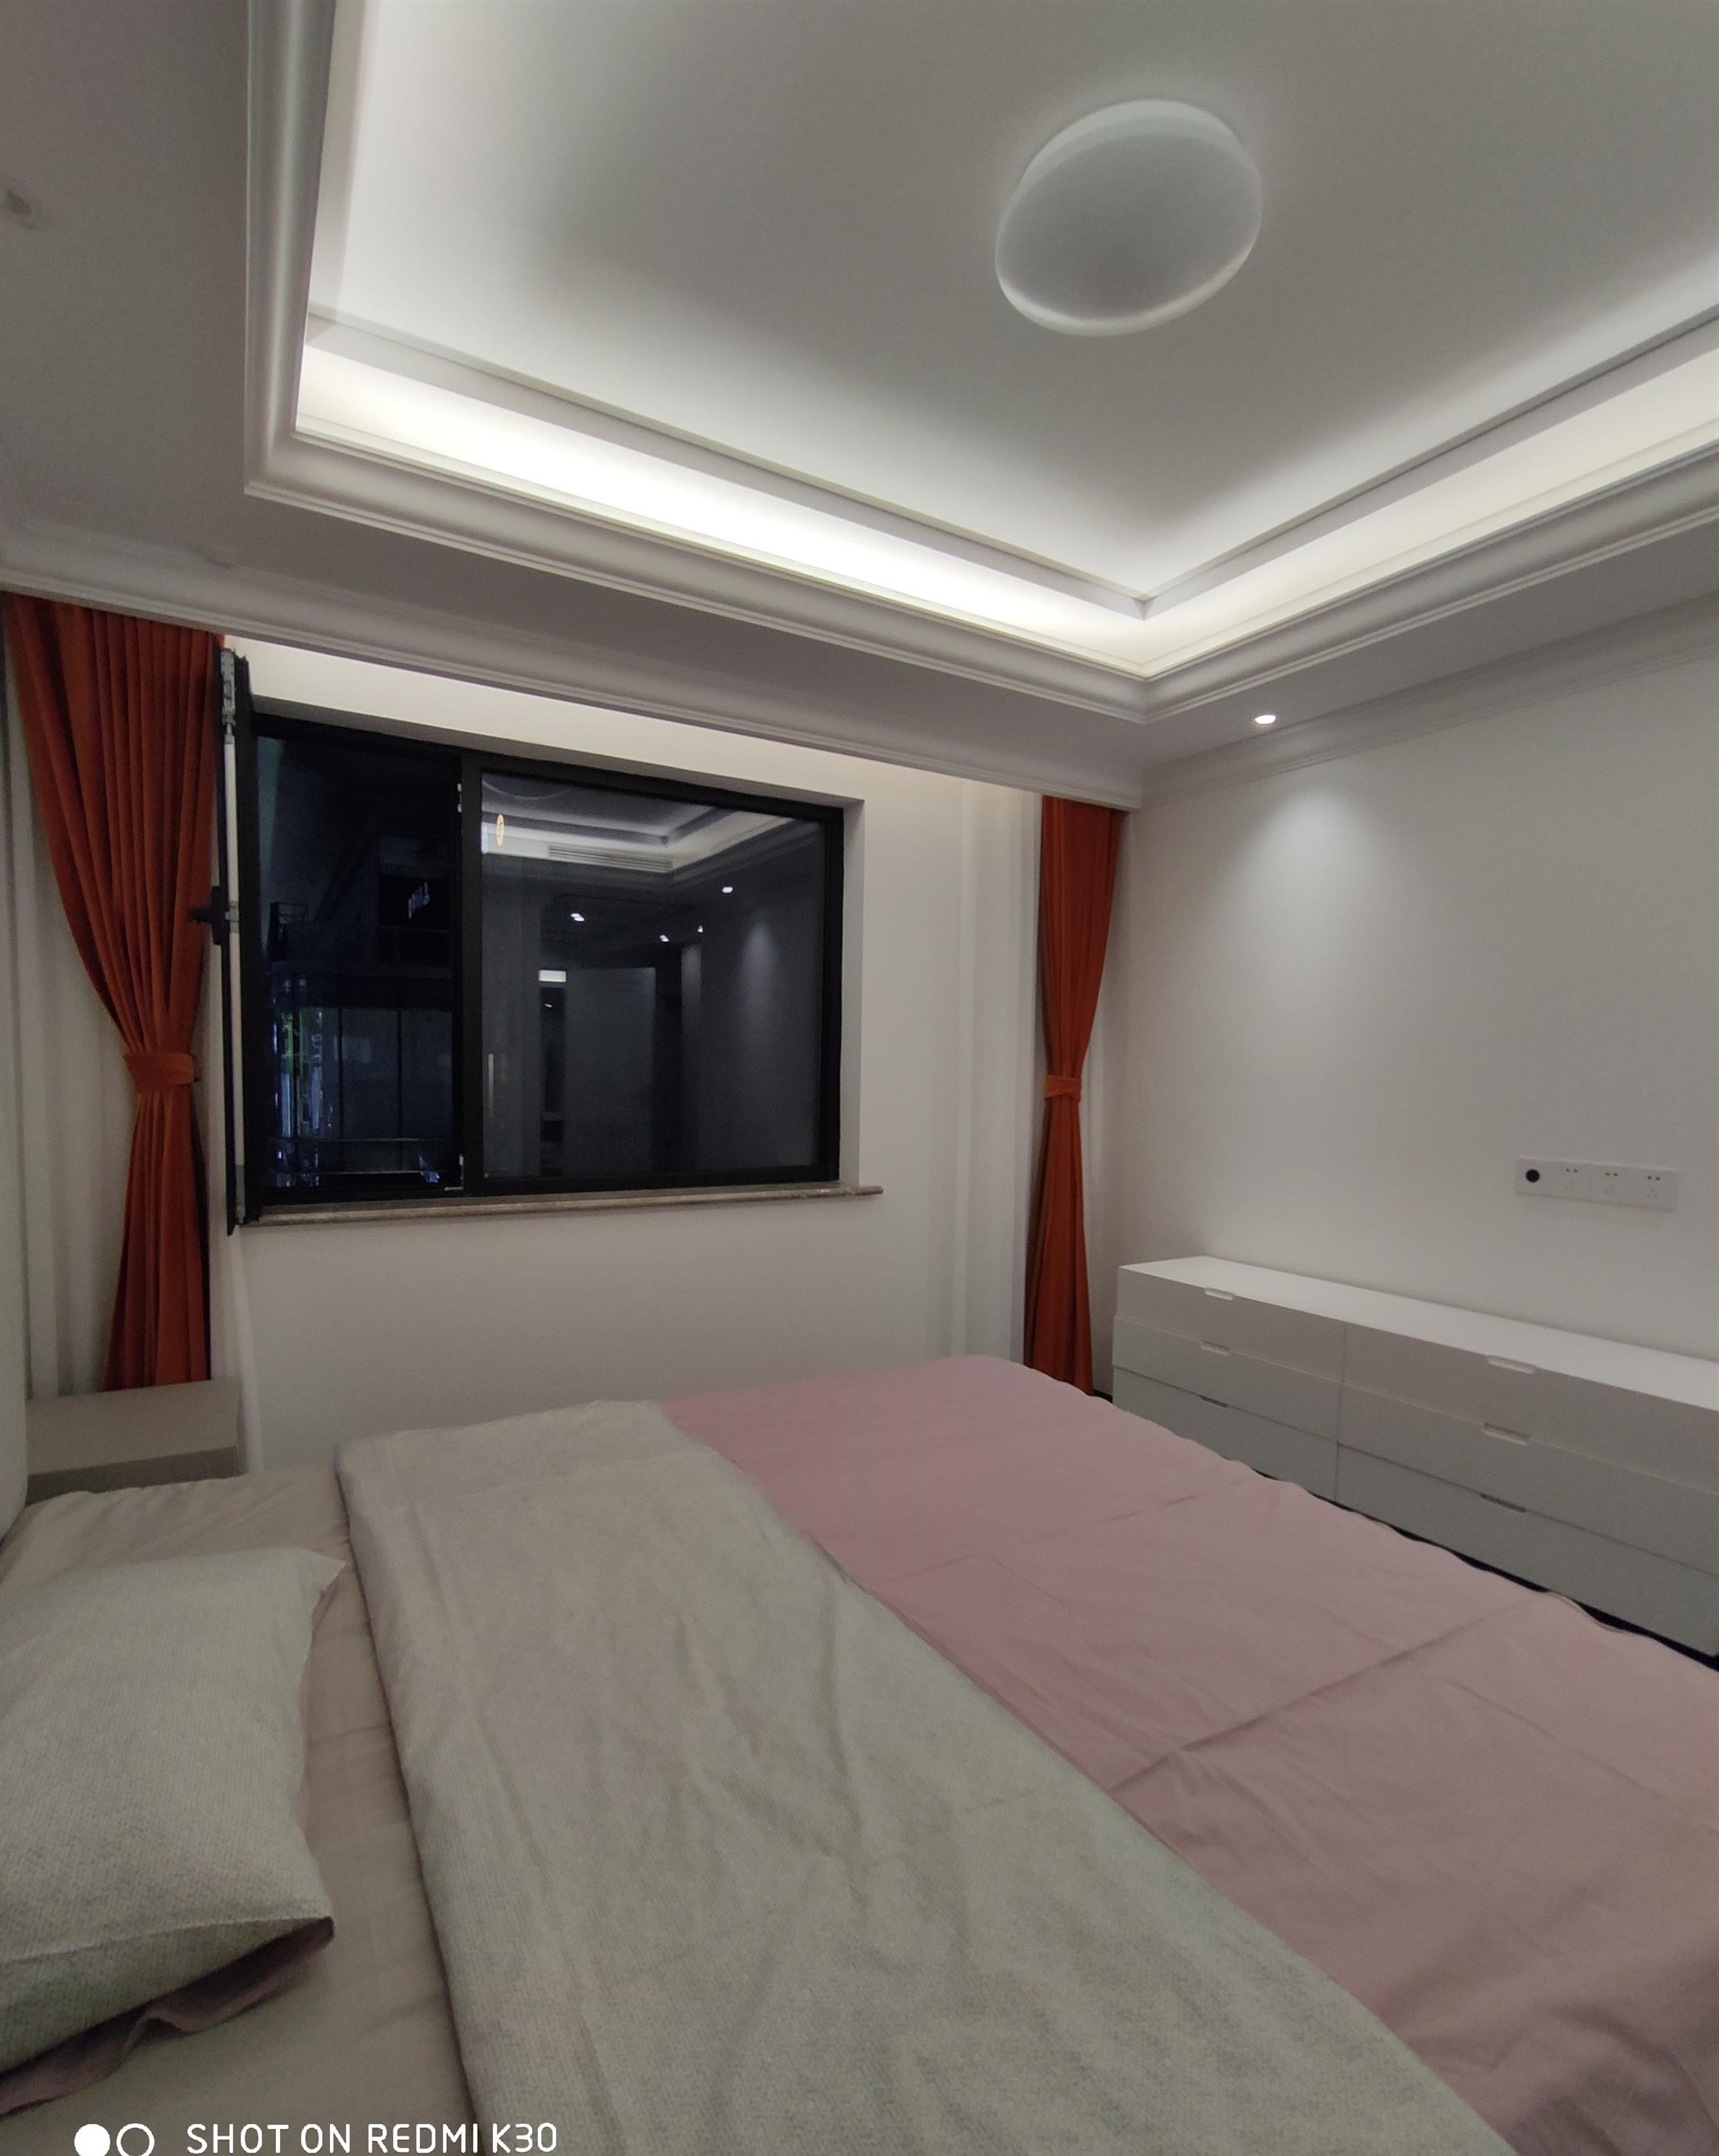 large new bed Newly Renovated Spacious Convenient 2BR Gubei Apartment nr LN 2 for Rent in Shanghai